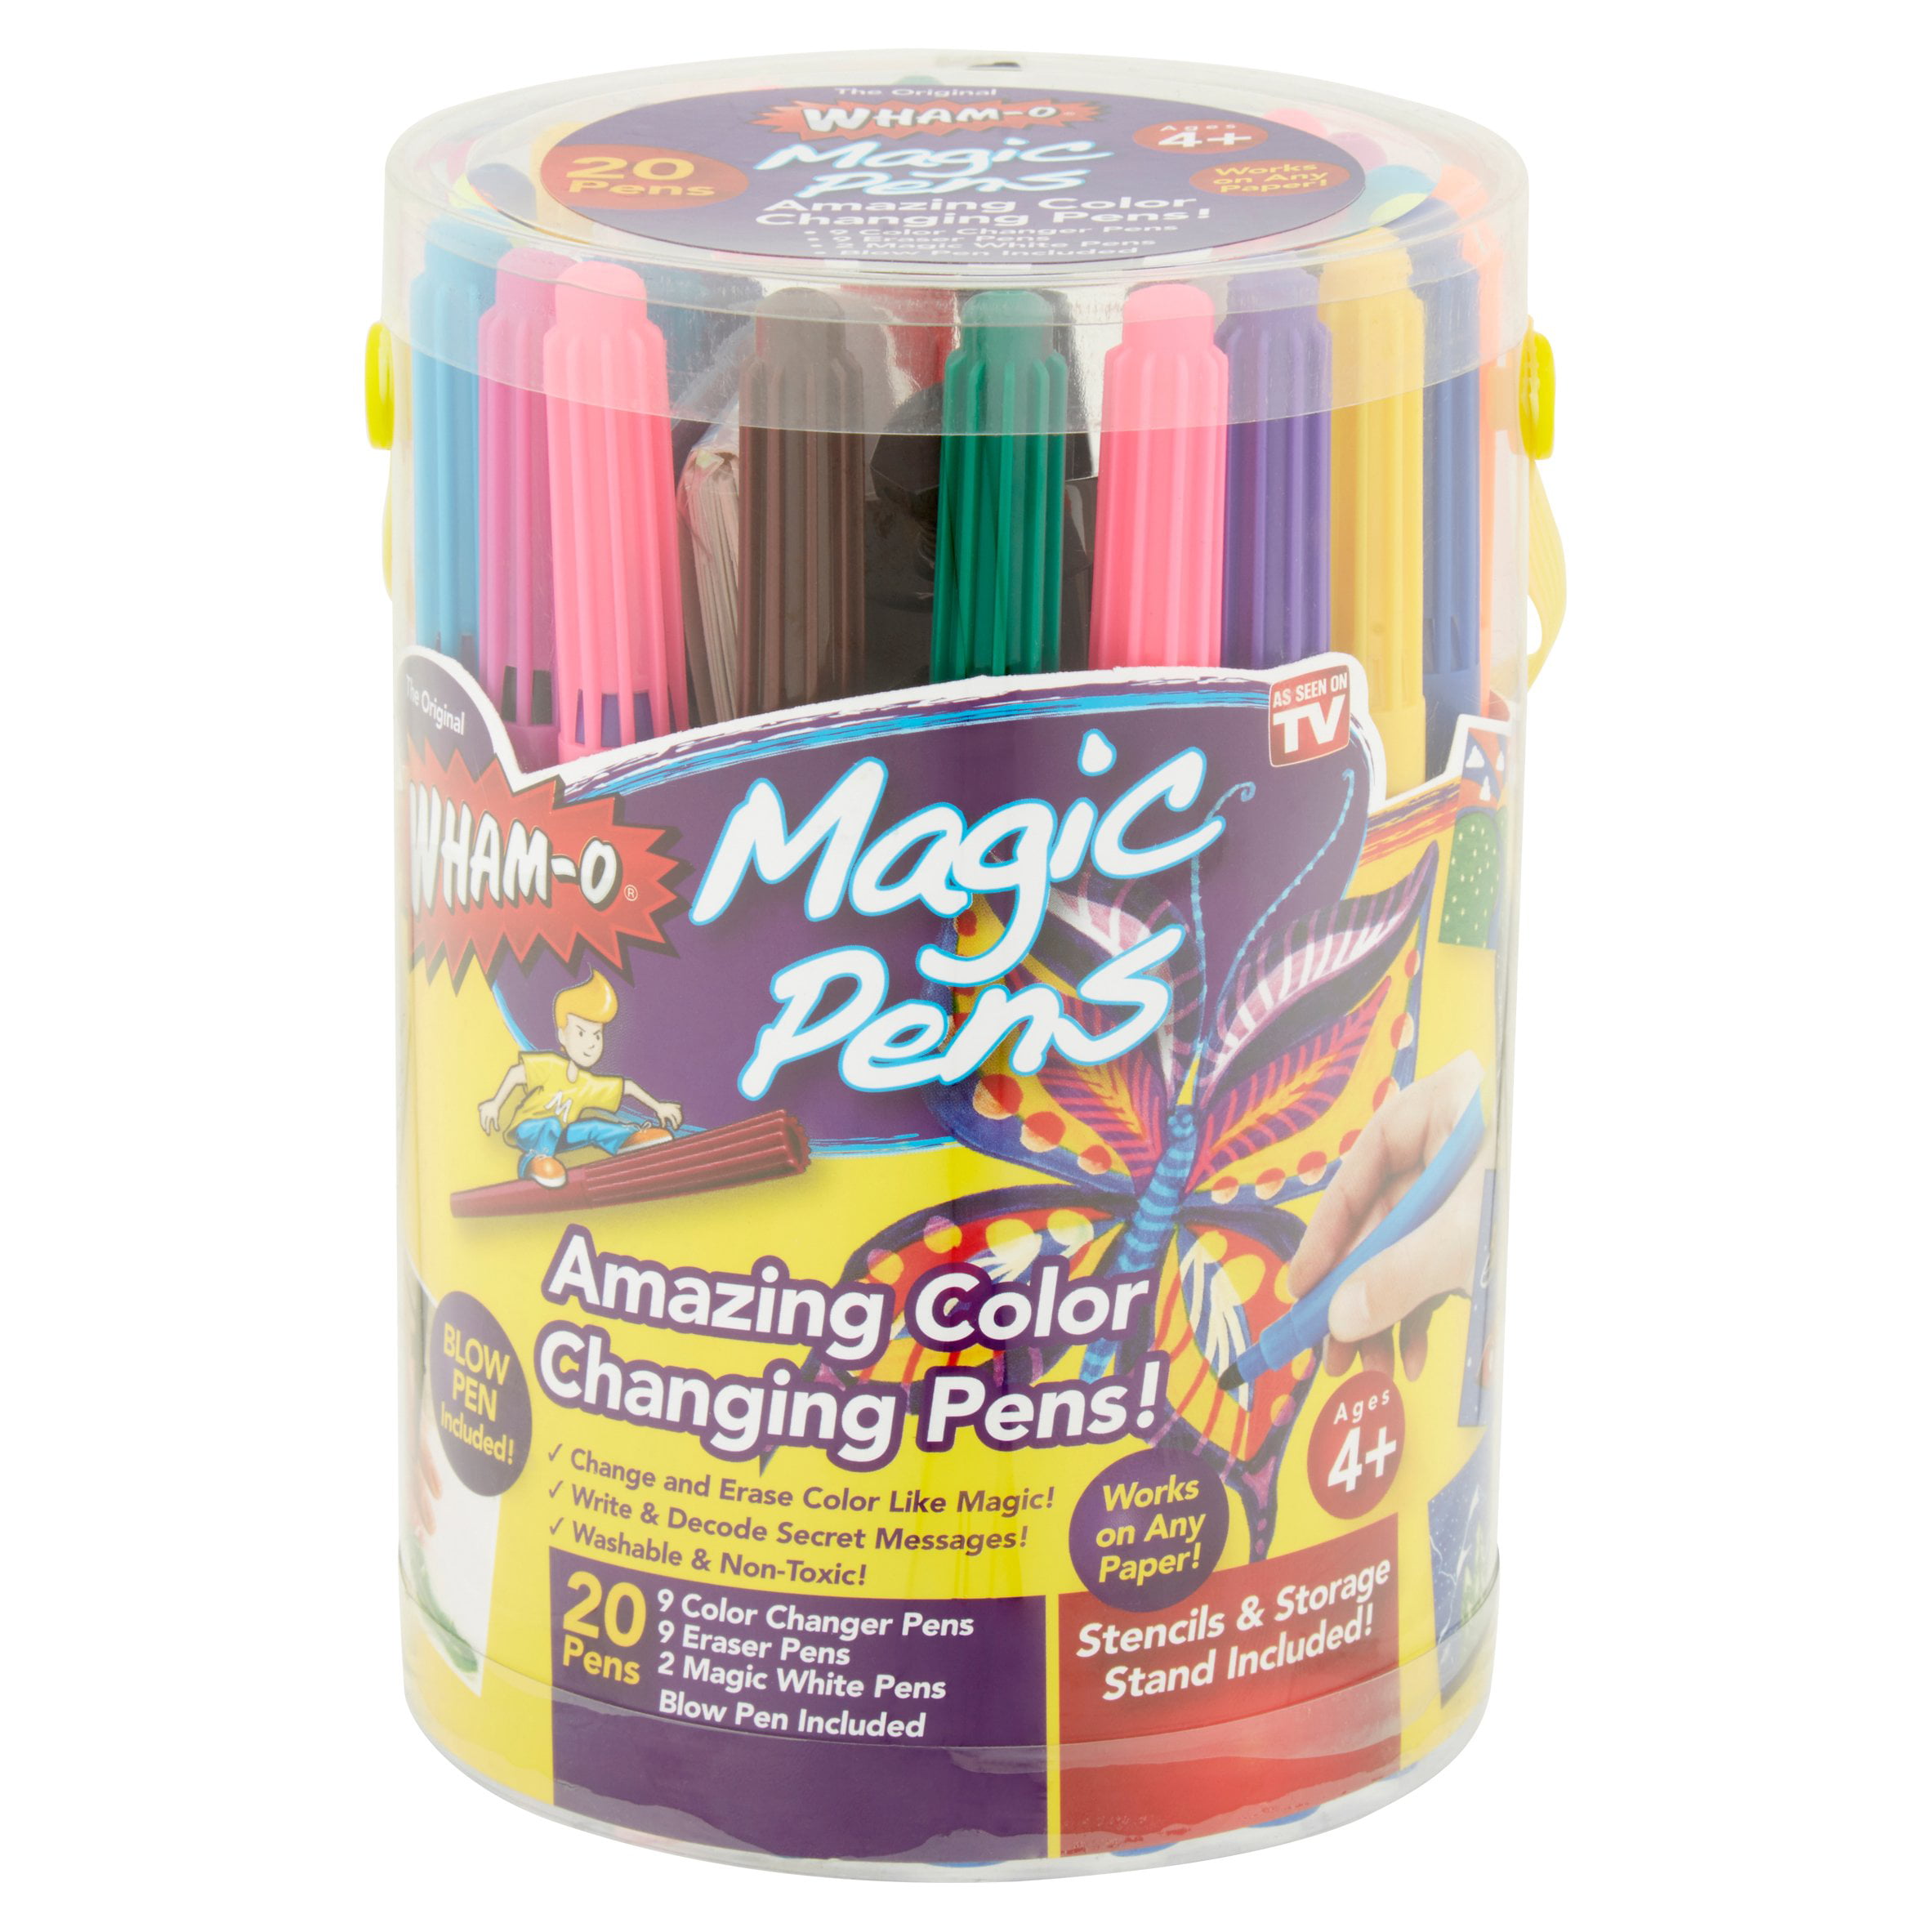 Magic Pens by Wham-O – As Seen On TV